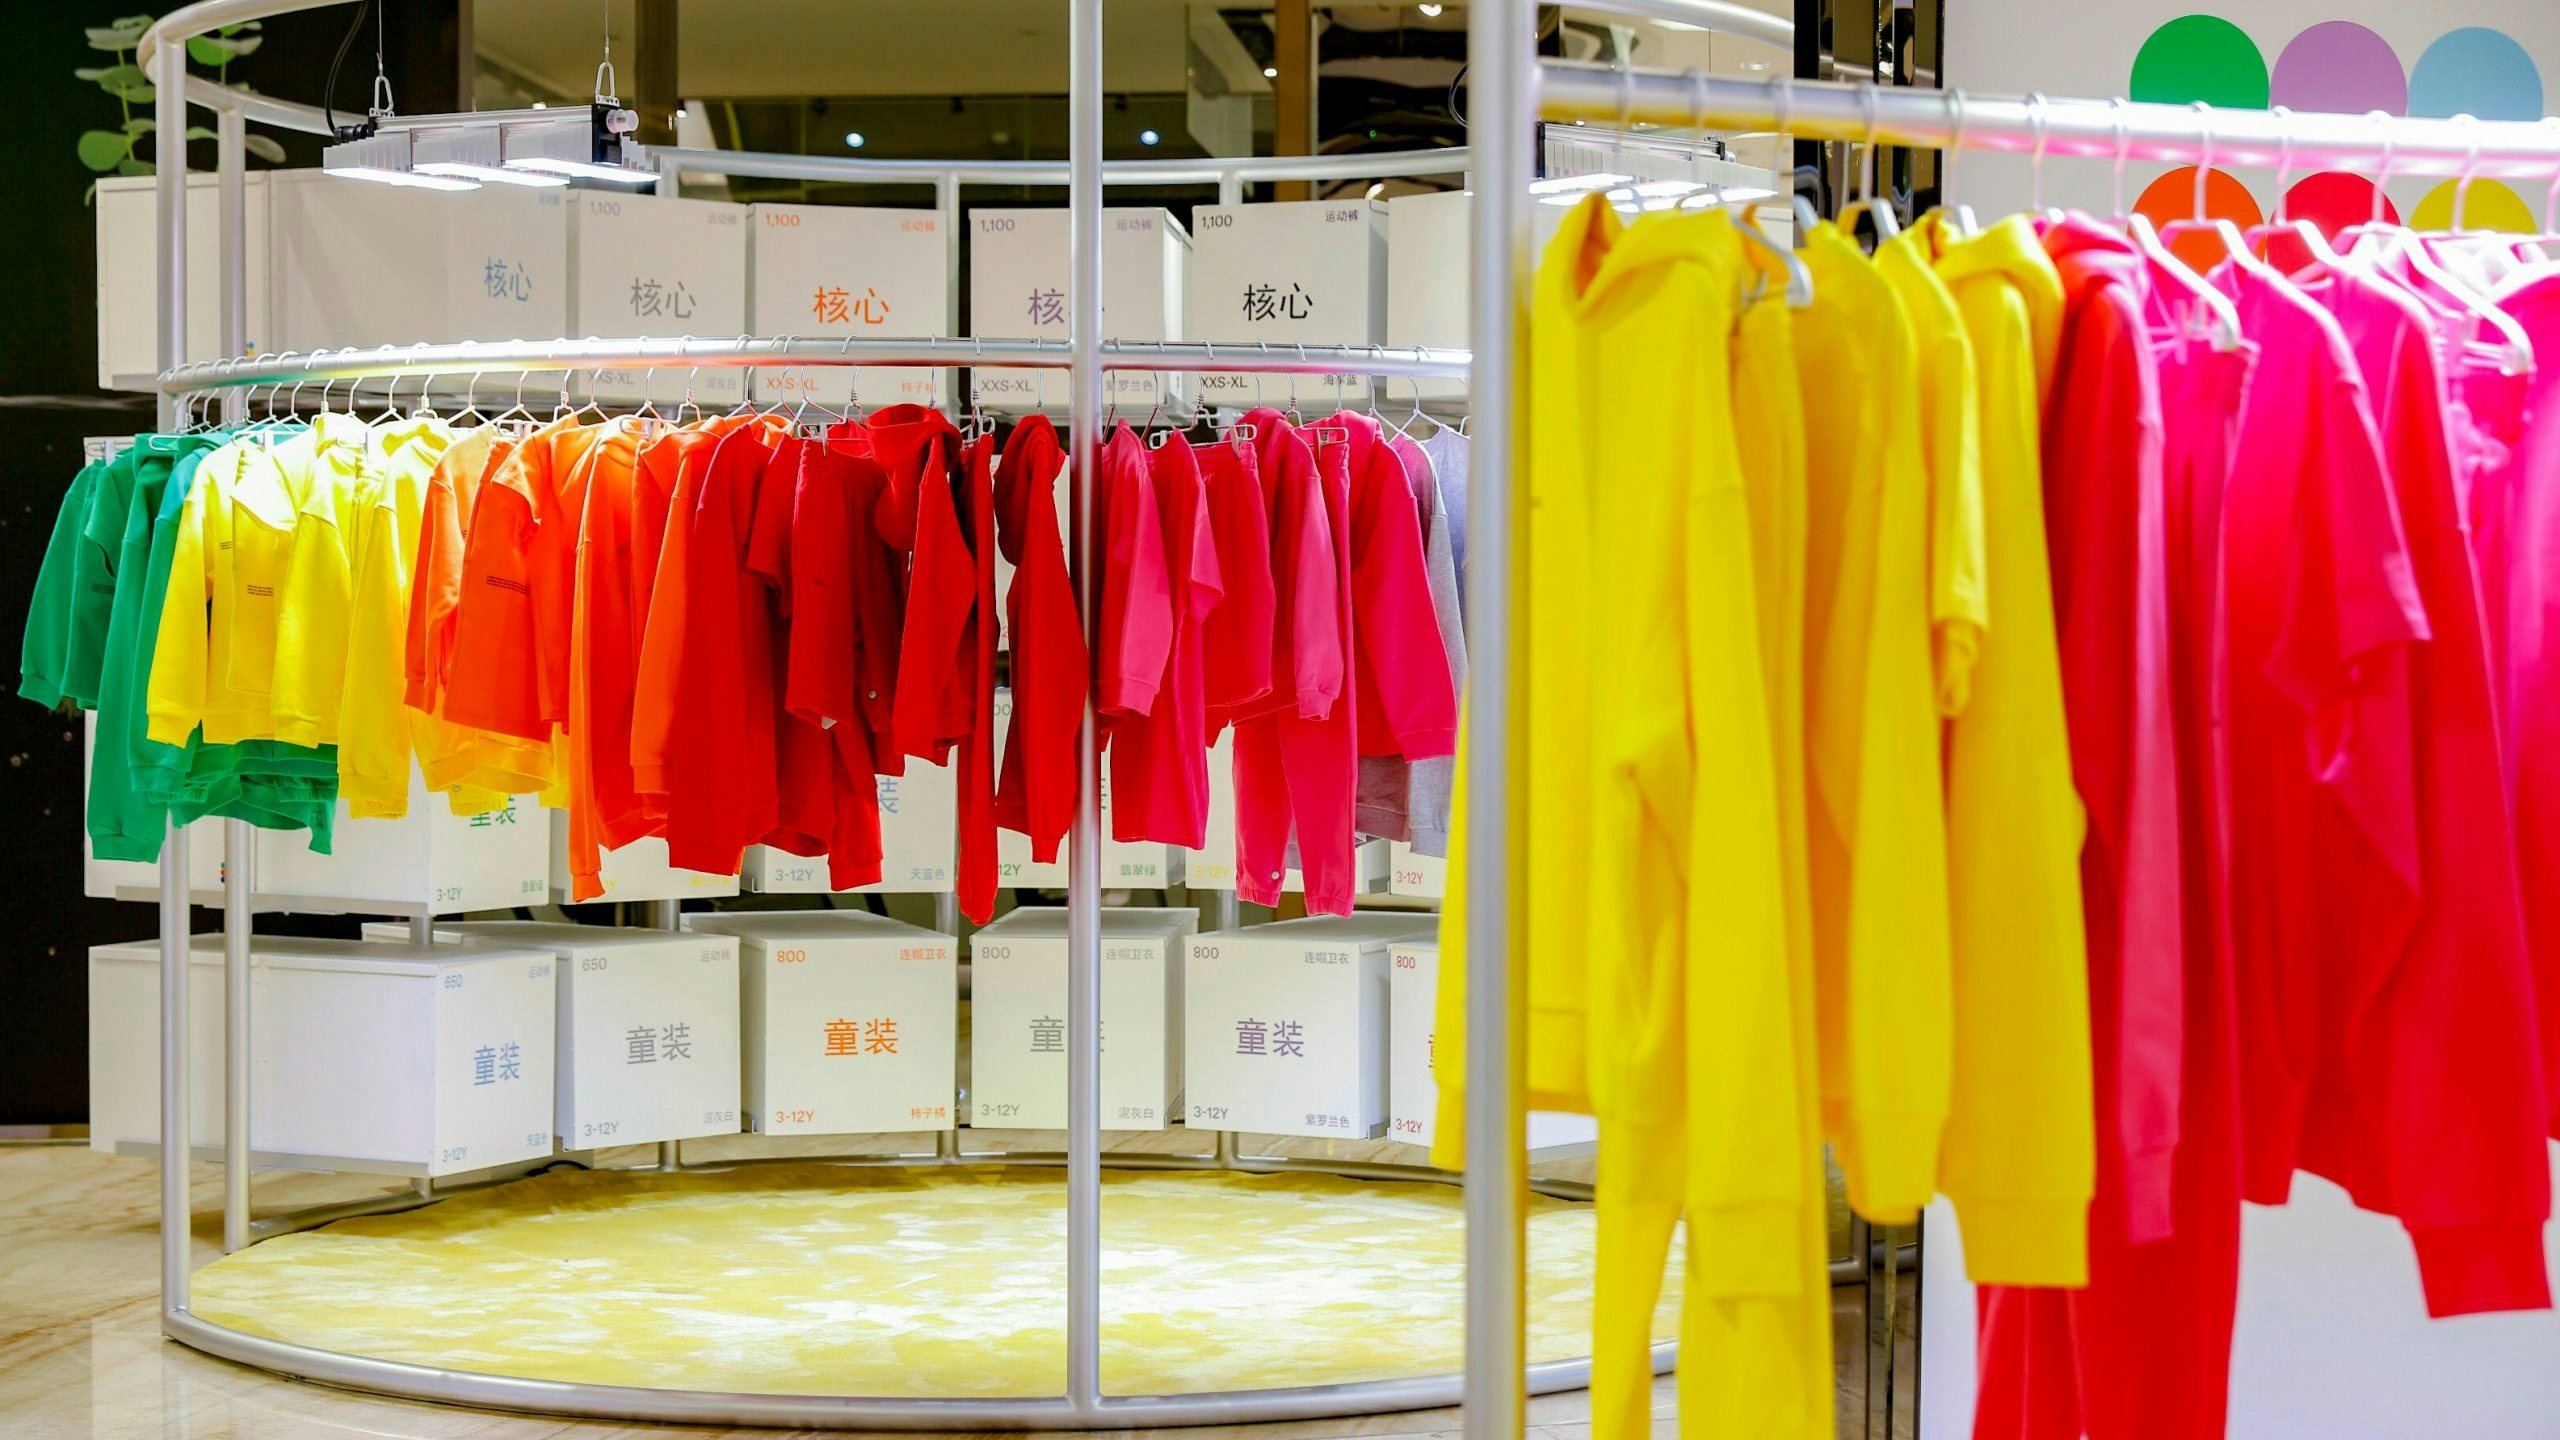 Pangaia, the materials science company, is partnering with luxury department store Lane Crawford to deliver climate positive installations around China. Photo: Courtesy of Pangaia